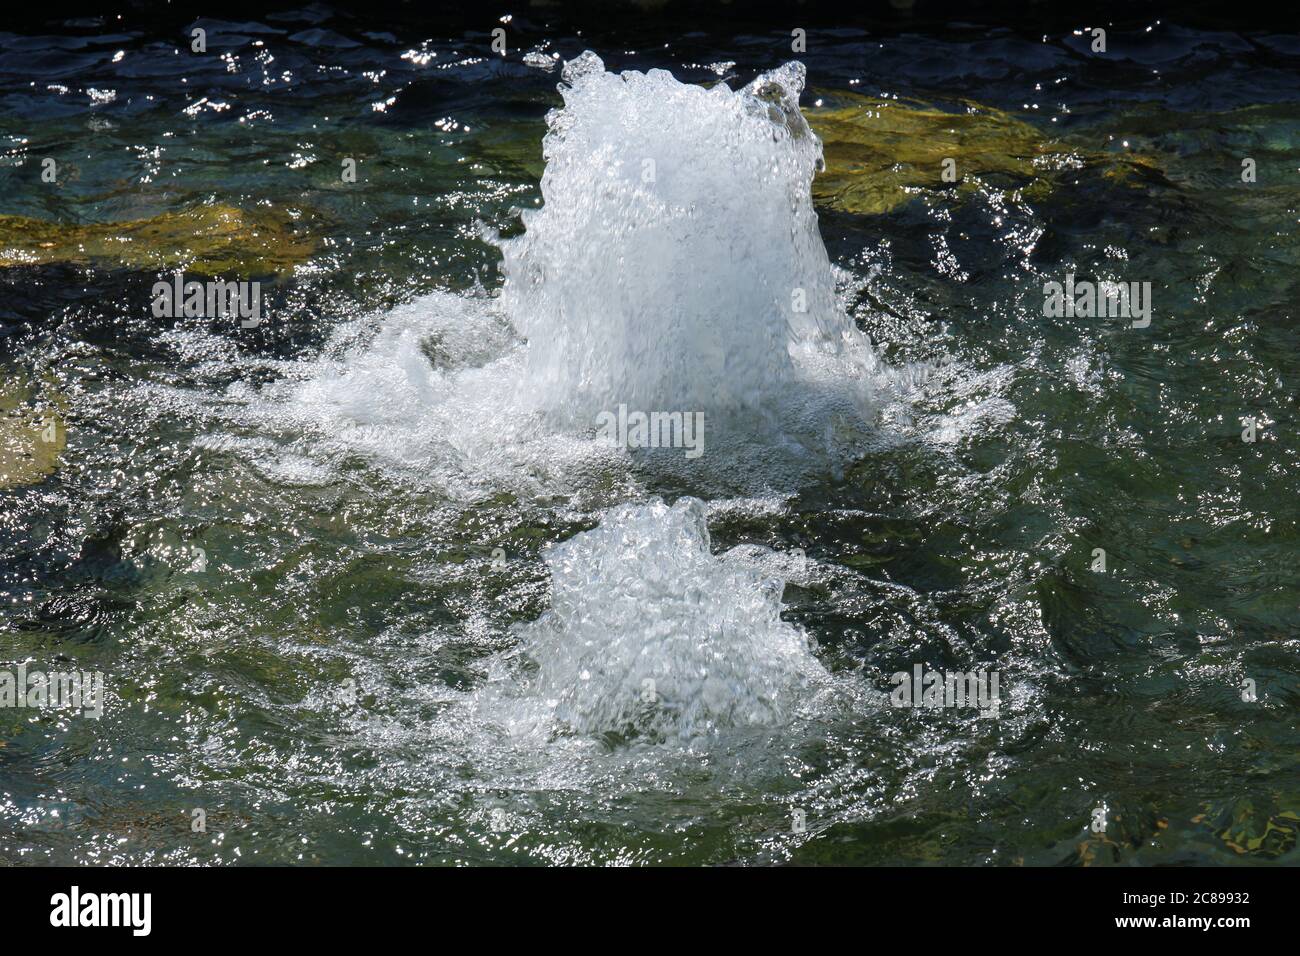 Close up of a waterfountain feature with water bubbling up at a park in Illinois, USA Stock Photo